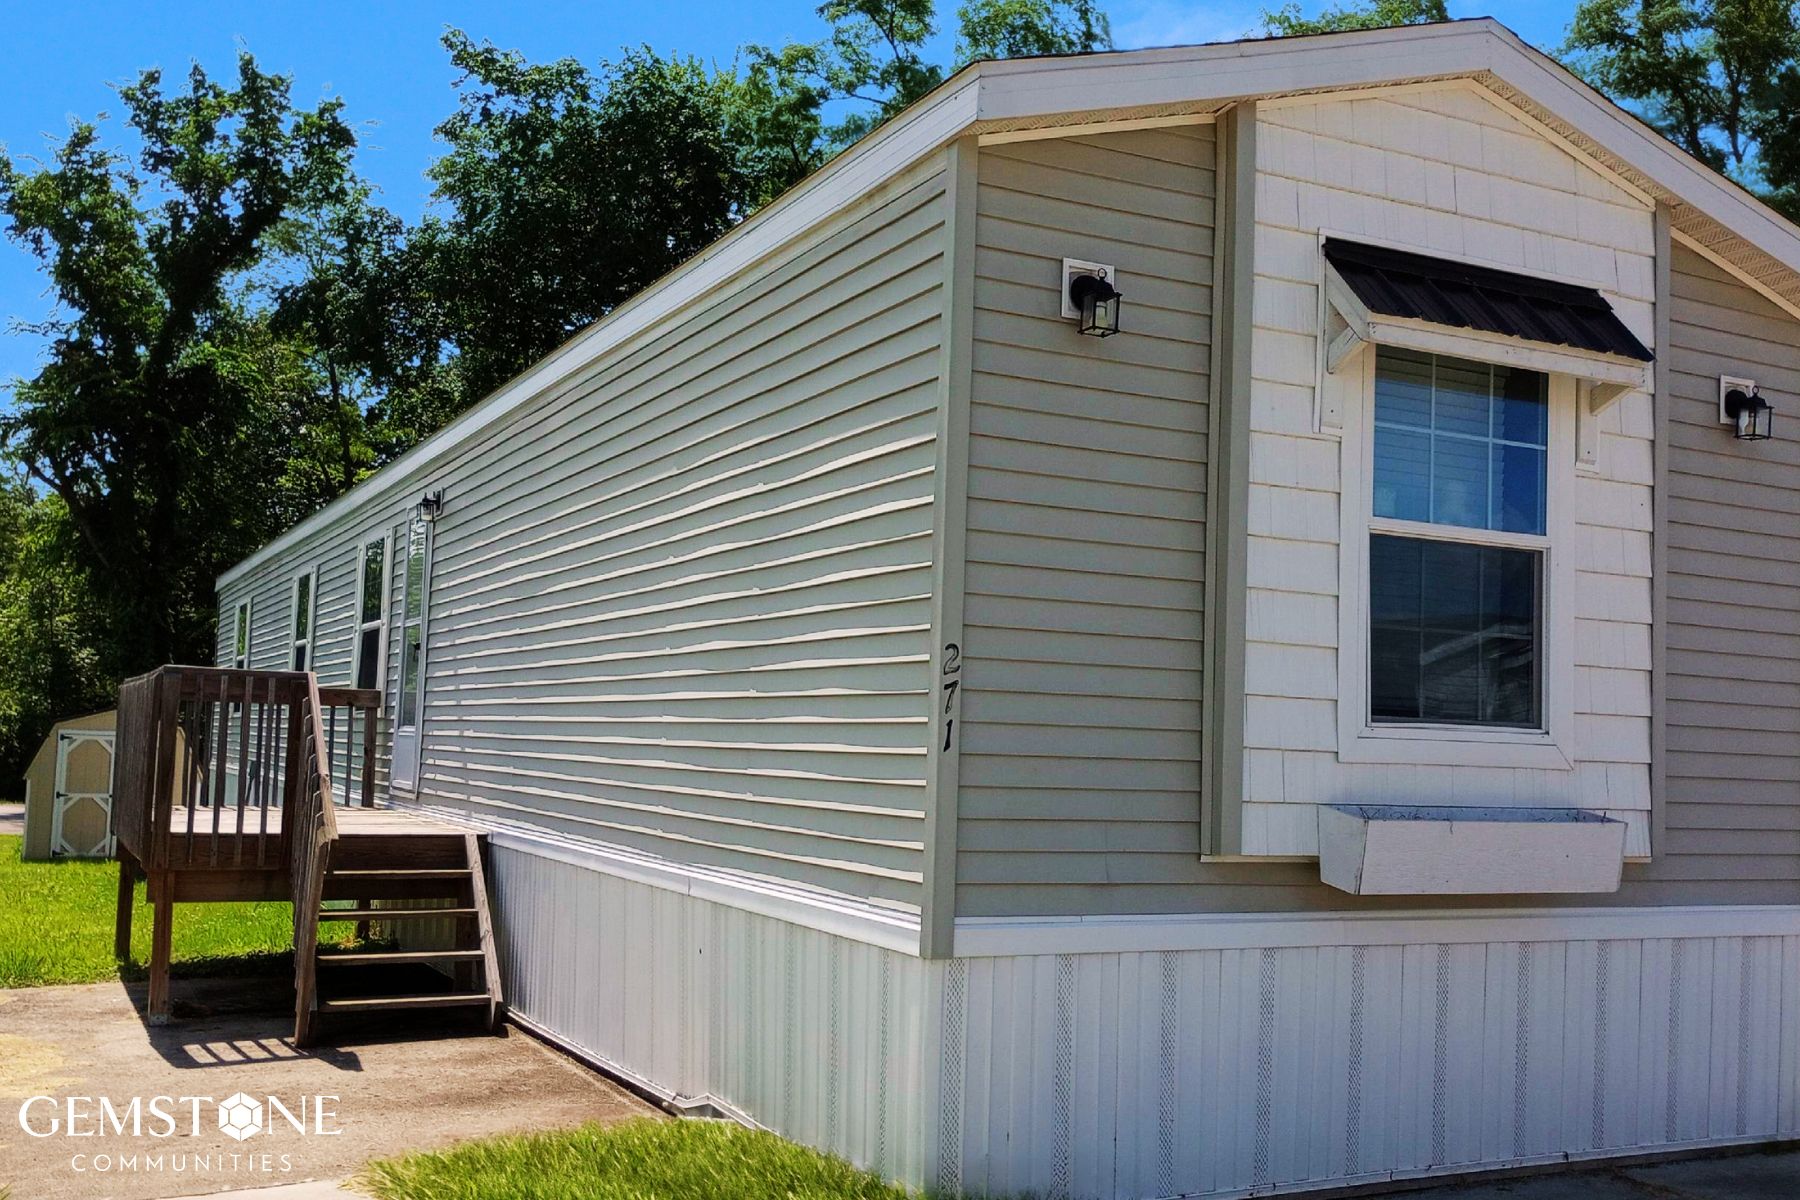 Lebanon Acres Lot 271 - Mobile Home for Sale Exterior